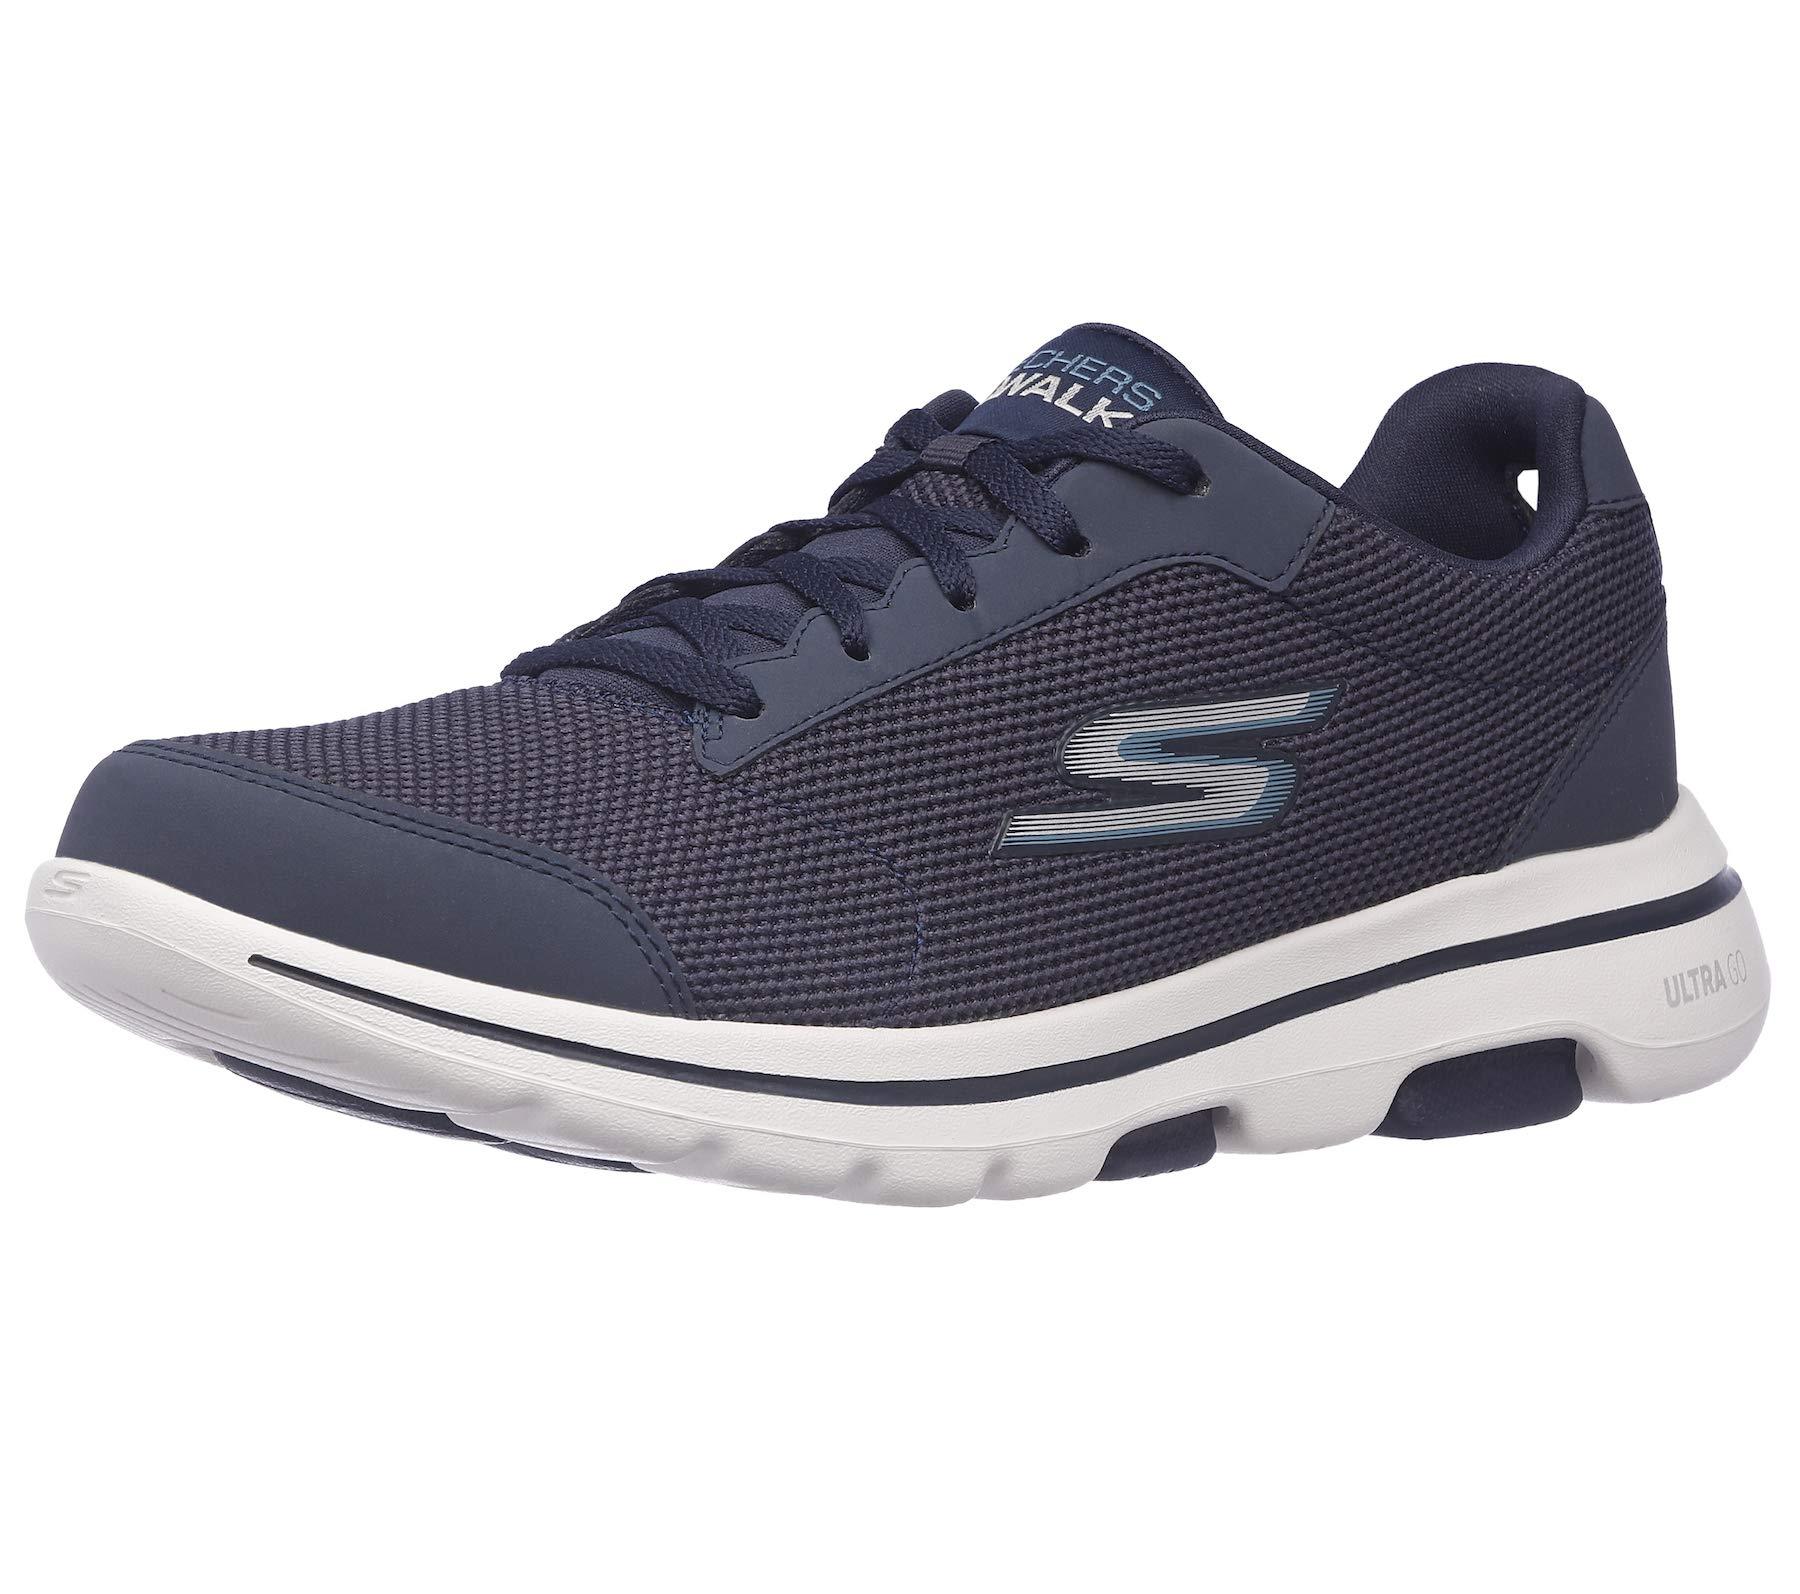 where can i find skechers go walk shoes